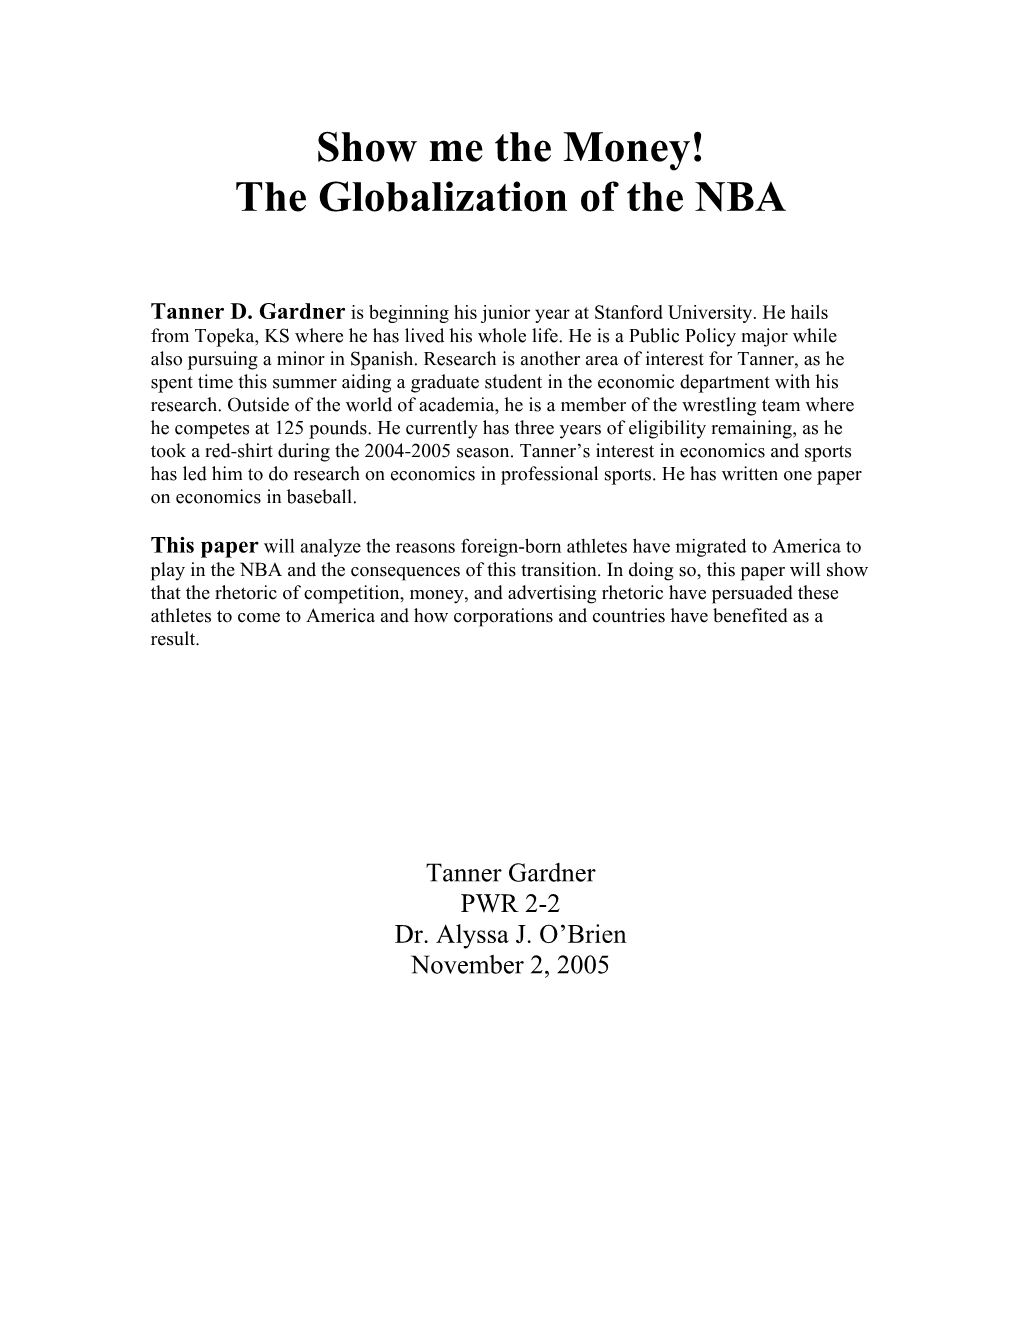 Show Me the Money! the Globalization of the NBA